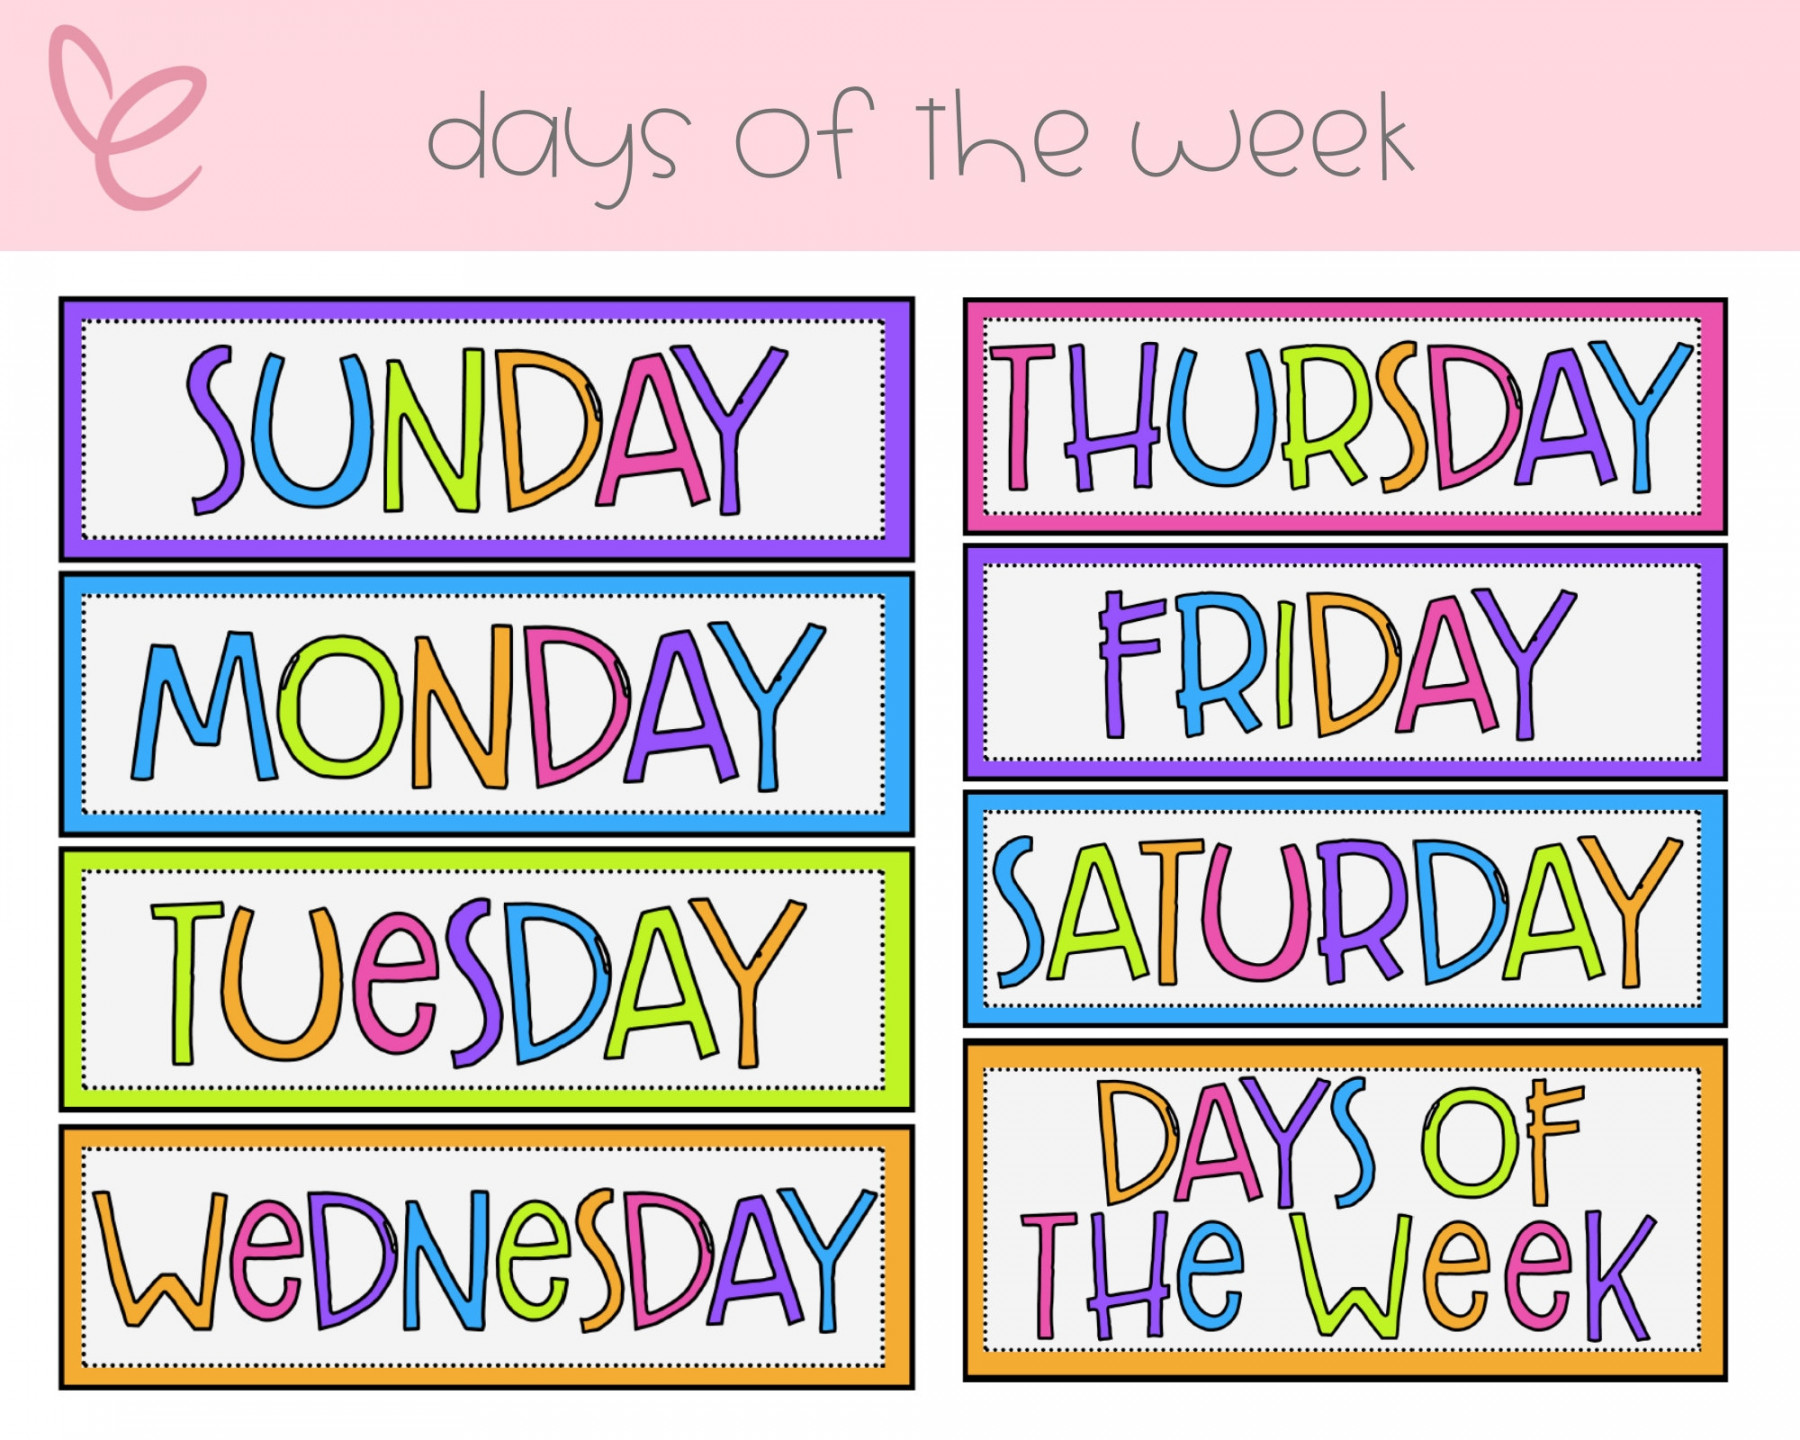 Days of the Week Days of the Week Printable Days of the - Etsy